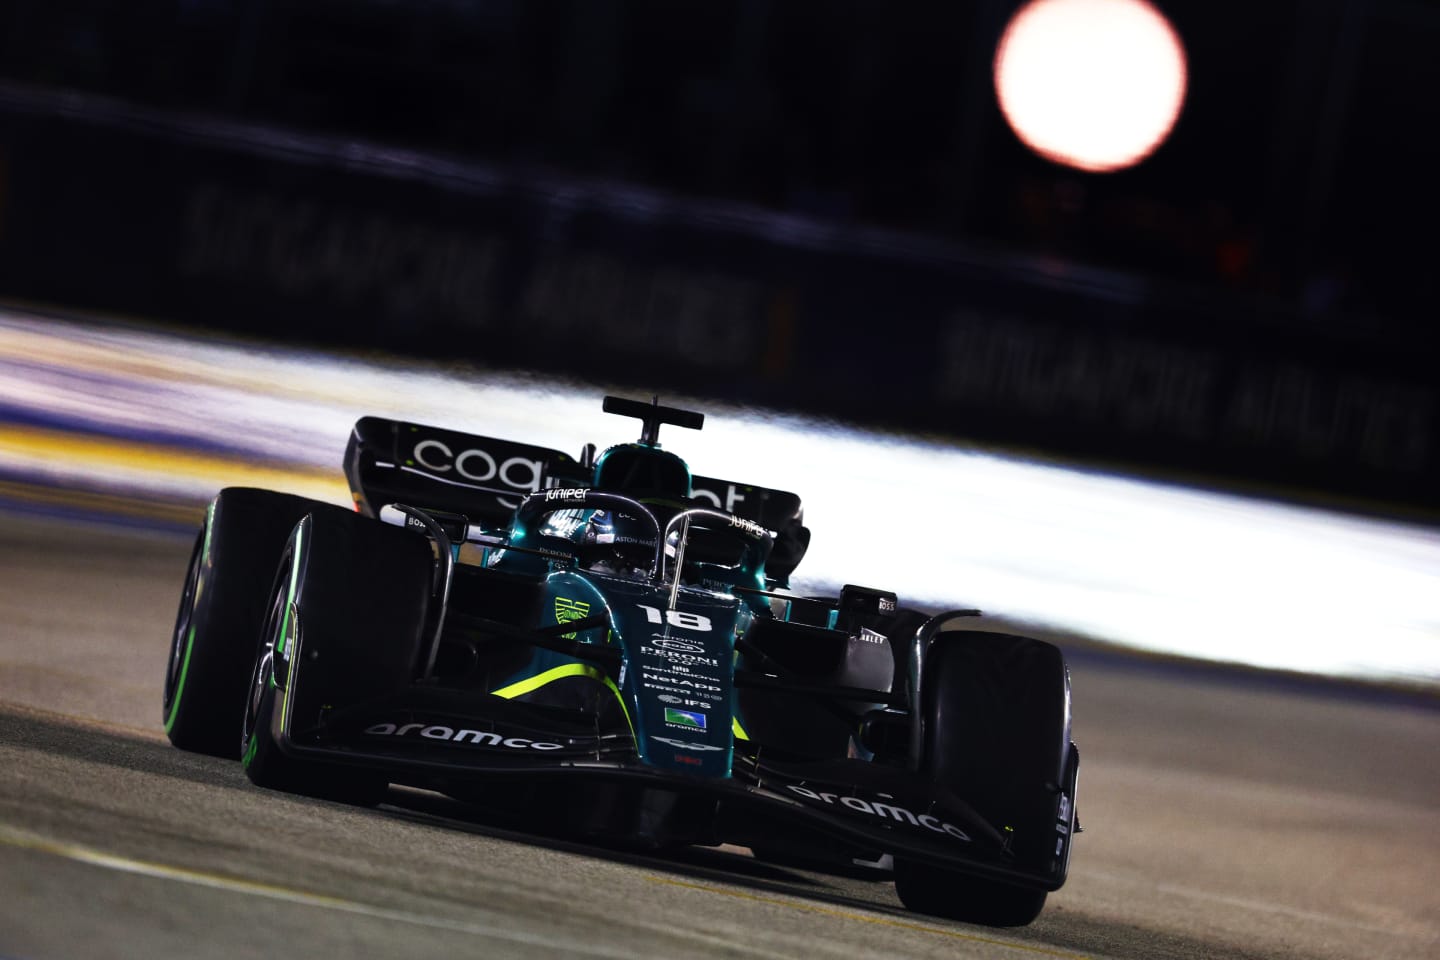 SINGAPORE, SINGAPORE - OCTOBER 02: Lance Stroll of Canada driving the (18) Aston Martin AMR22 Mercedes on track during the F1 Grand Prix of Singapore at Marina Bay Street Circuit on October 02, 2022 in Singapore, Singapore. (Photo by Clive Rose/Getty Images,)